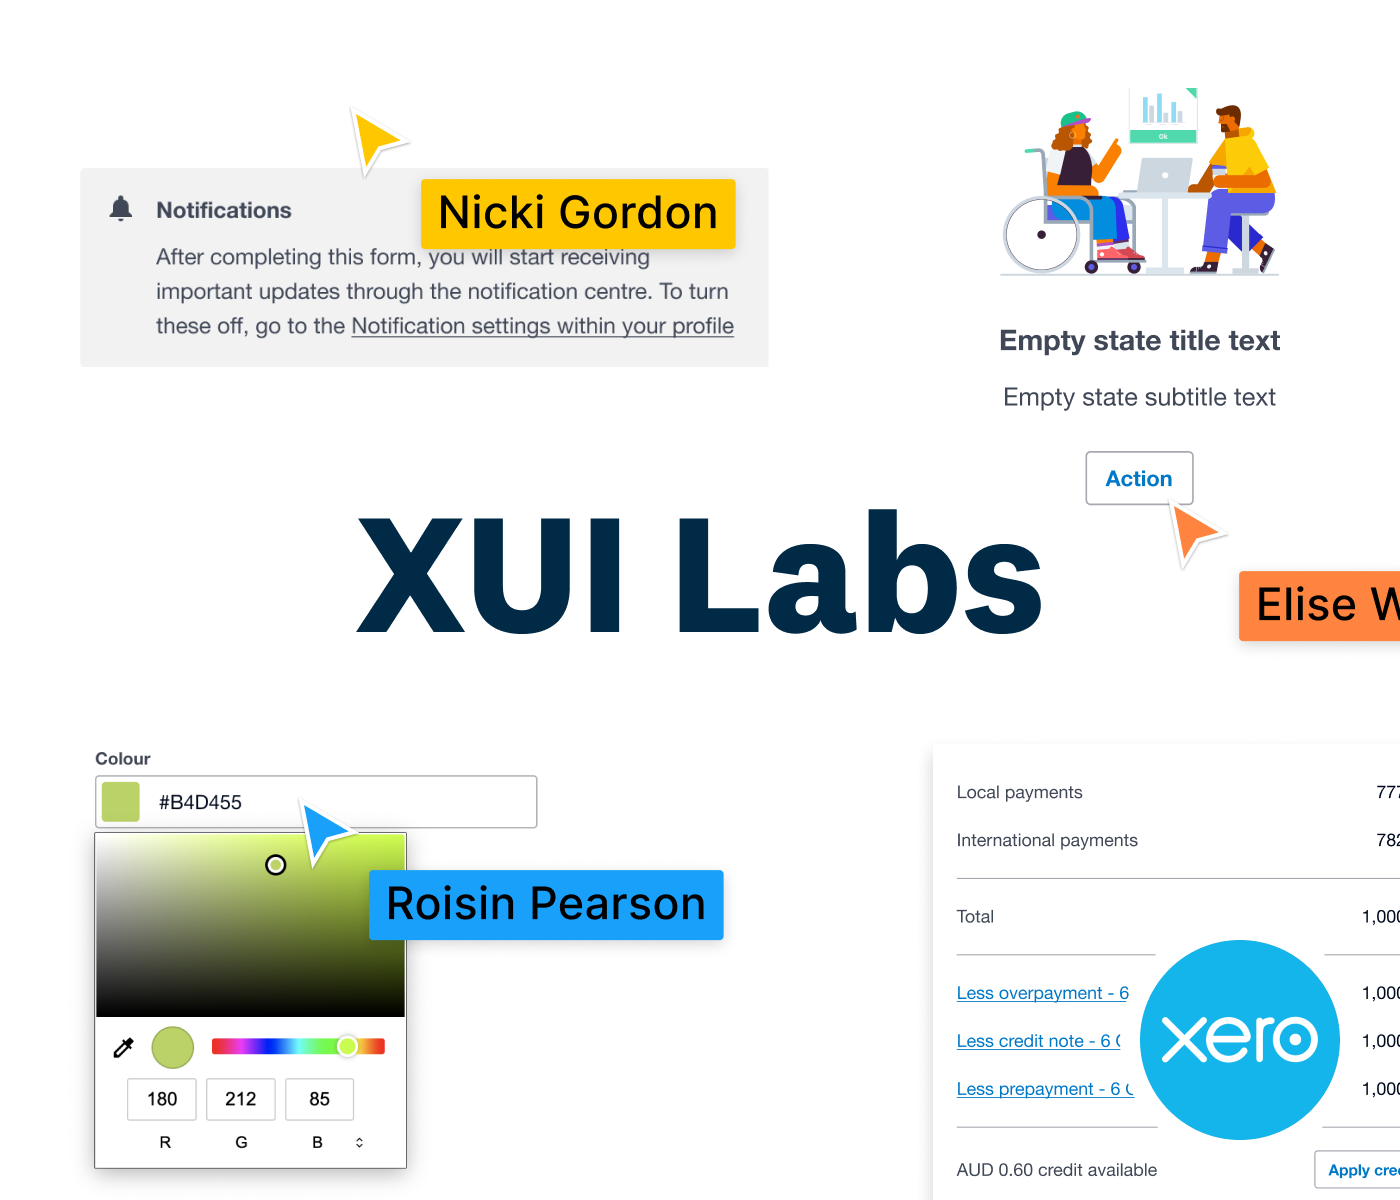 An image showing visual examples of contributed XUI Labs components with multiplayer Figma cursors to indicate collaboration as well as a Xero logo in the corner